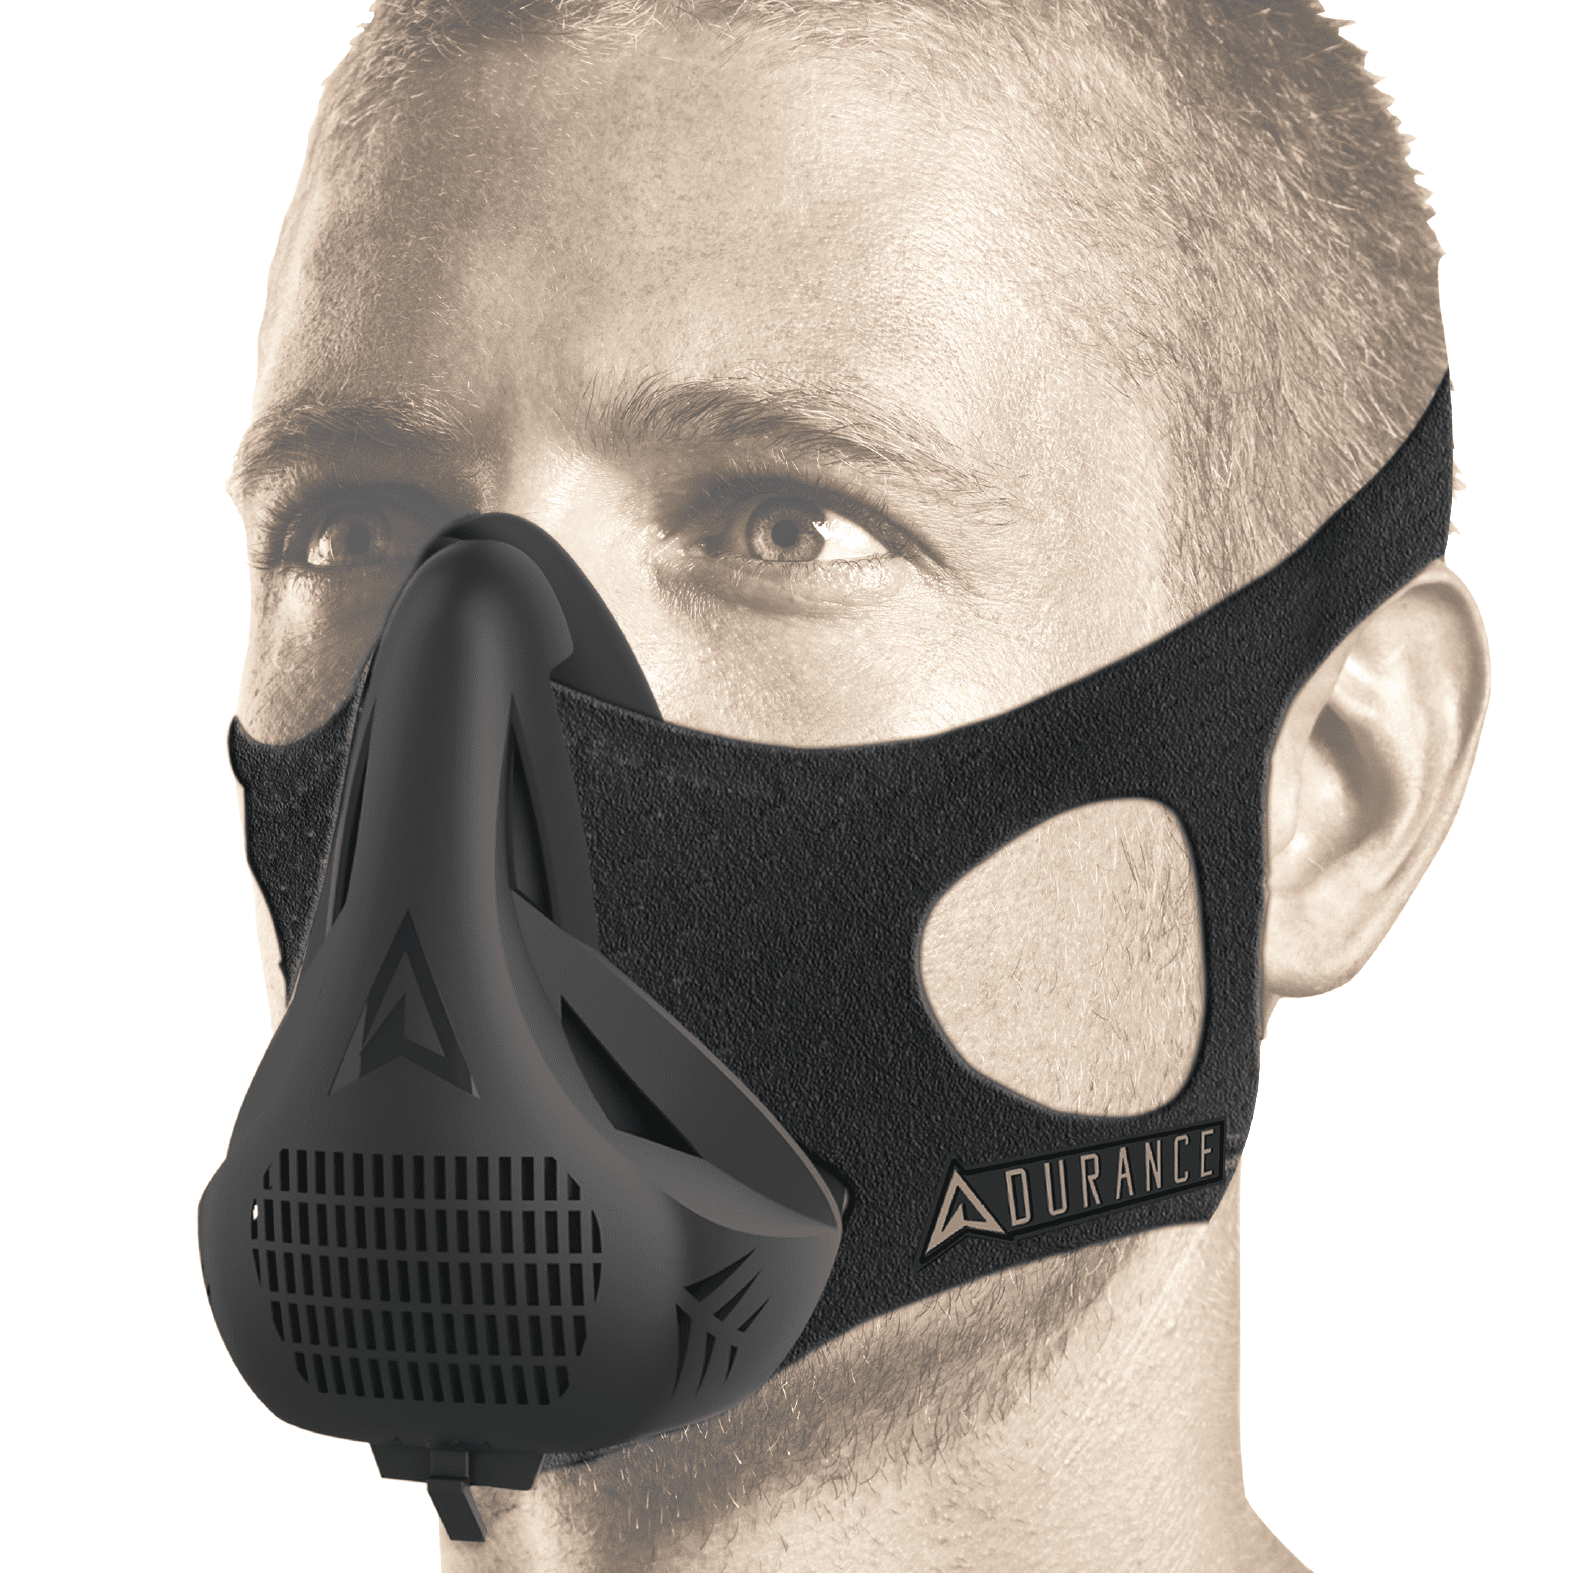 Outdoor Cycling Dustproof Windproof Face Mask Filter Breathing Training Altitude 